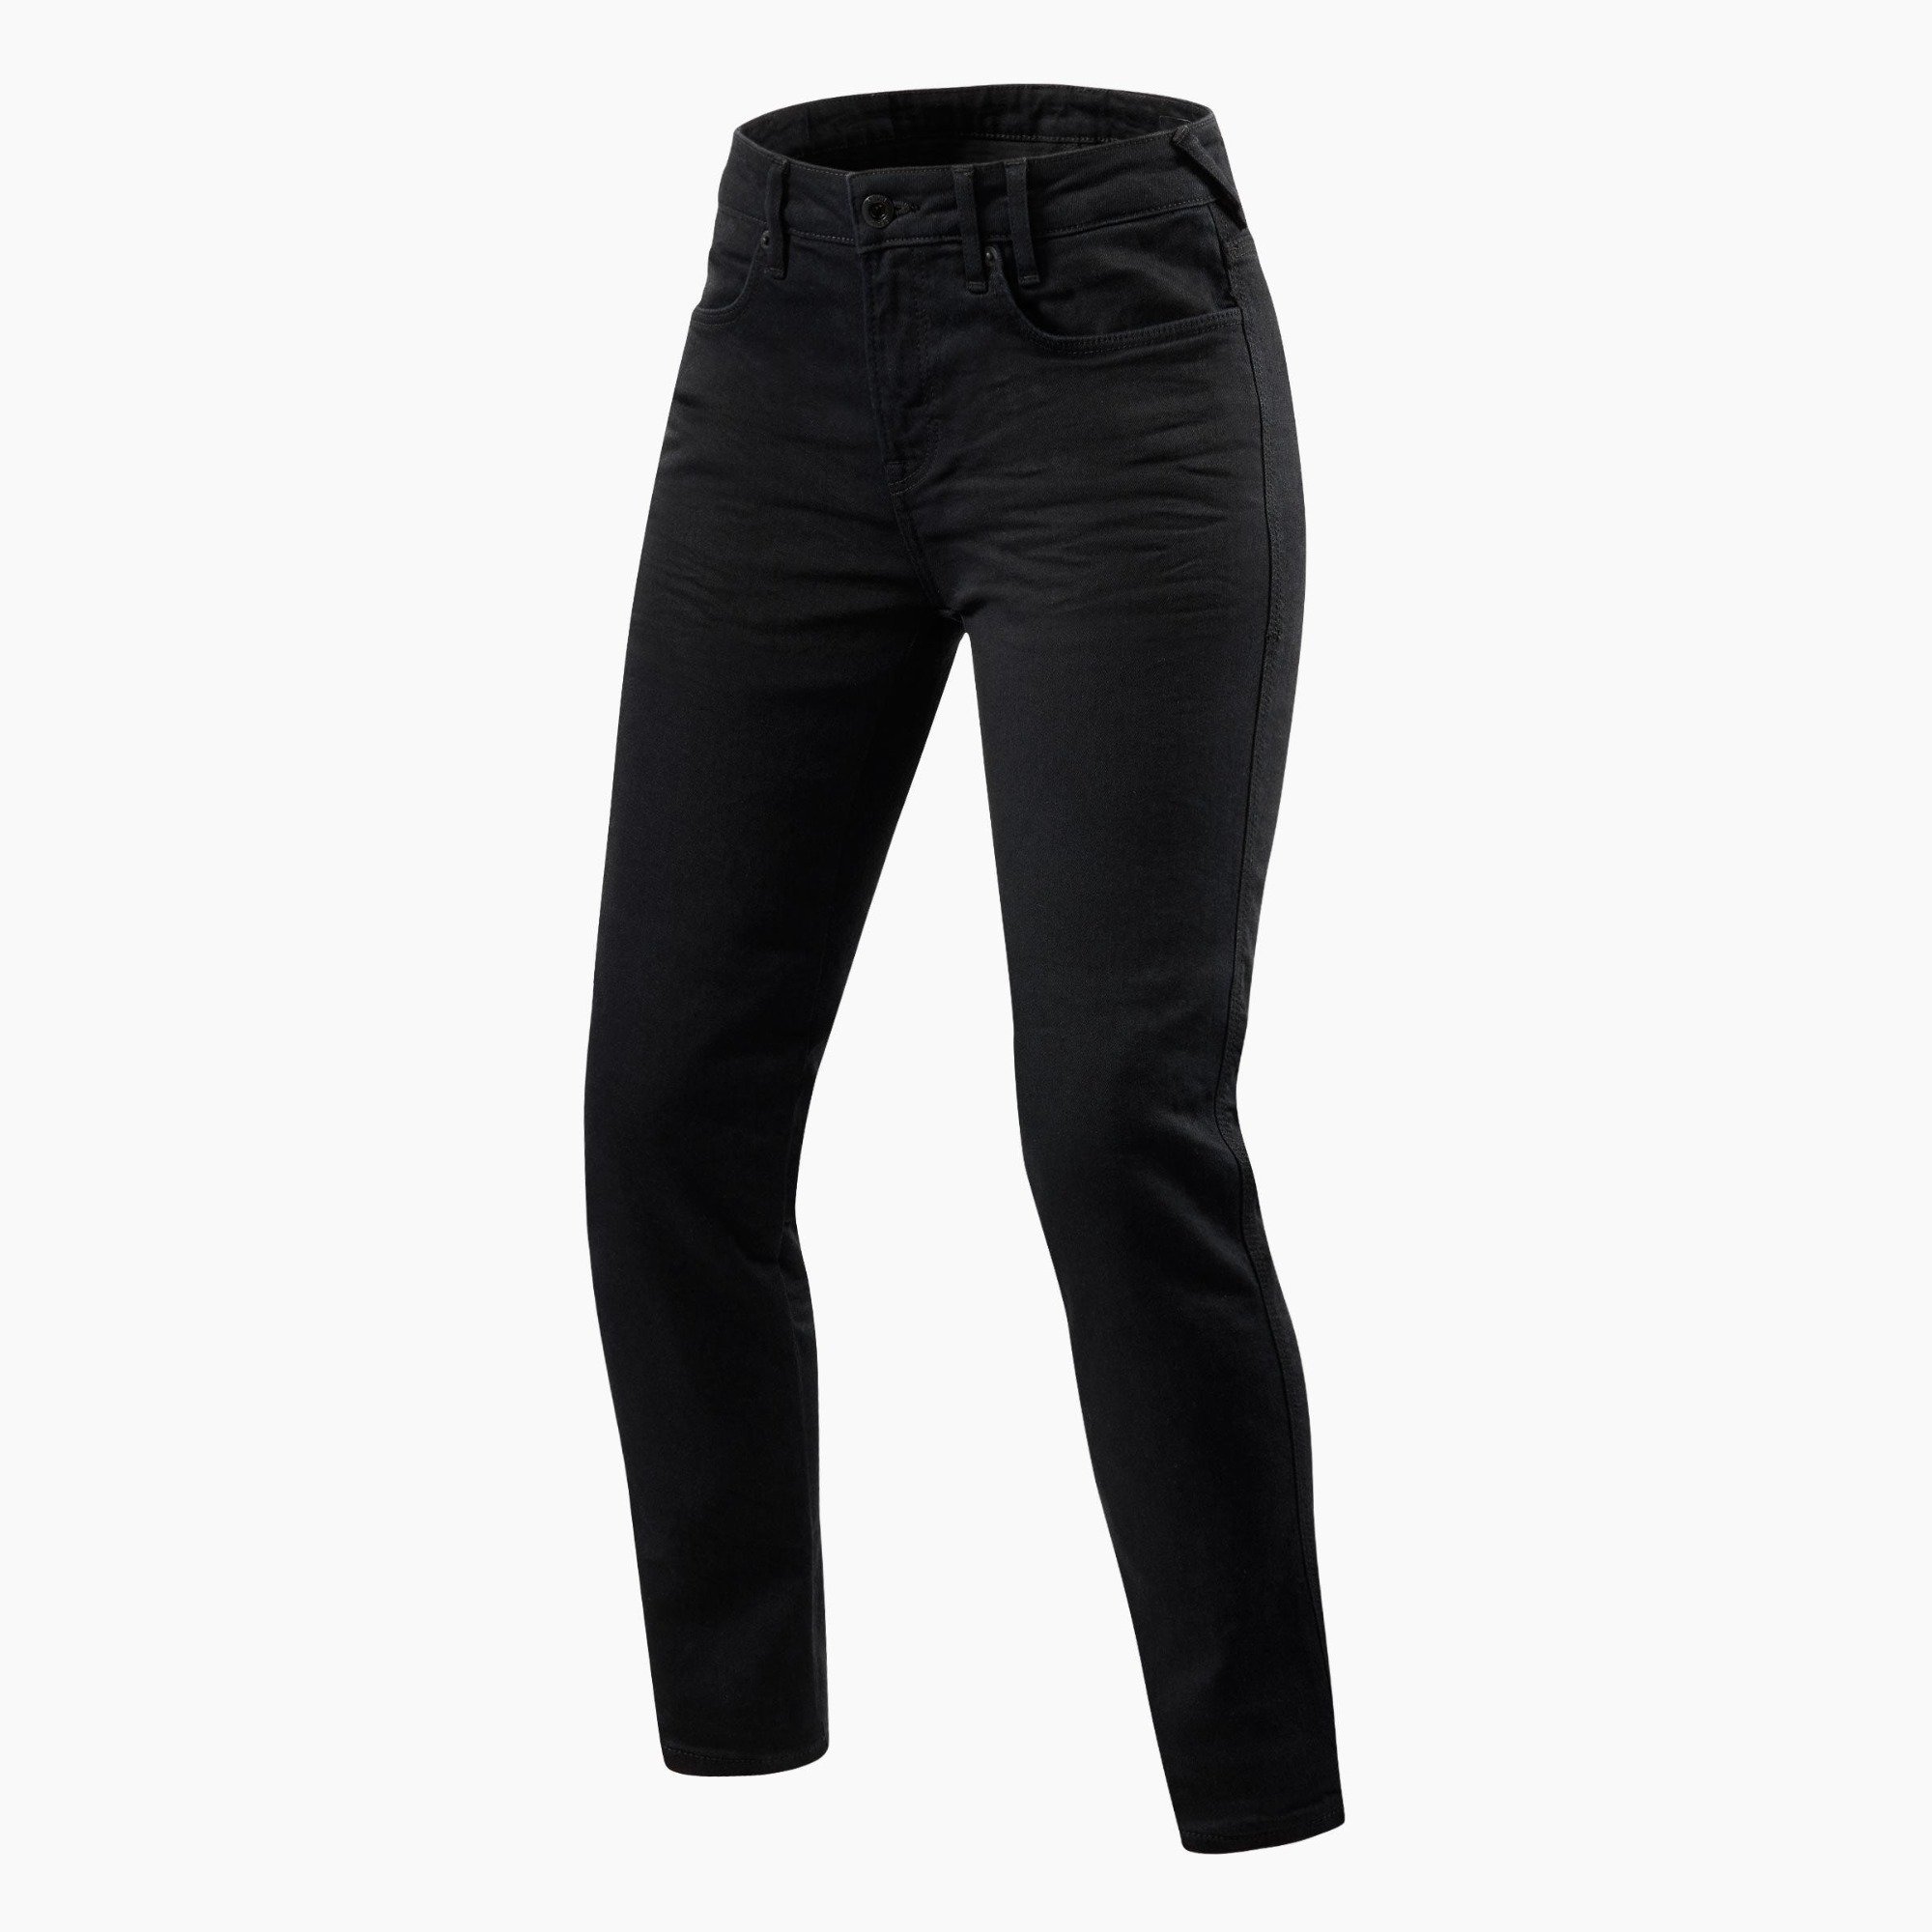 Image of REV'IT! Jeans Maple 2 Ladies SK Black Motorcycle Jeans Size L32/W27 ID 8700001342216